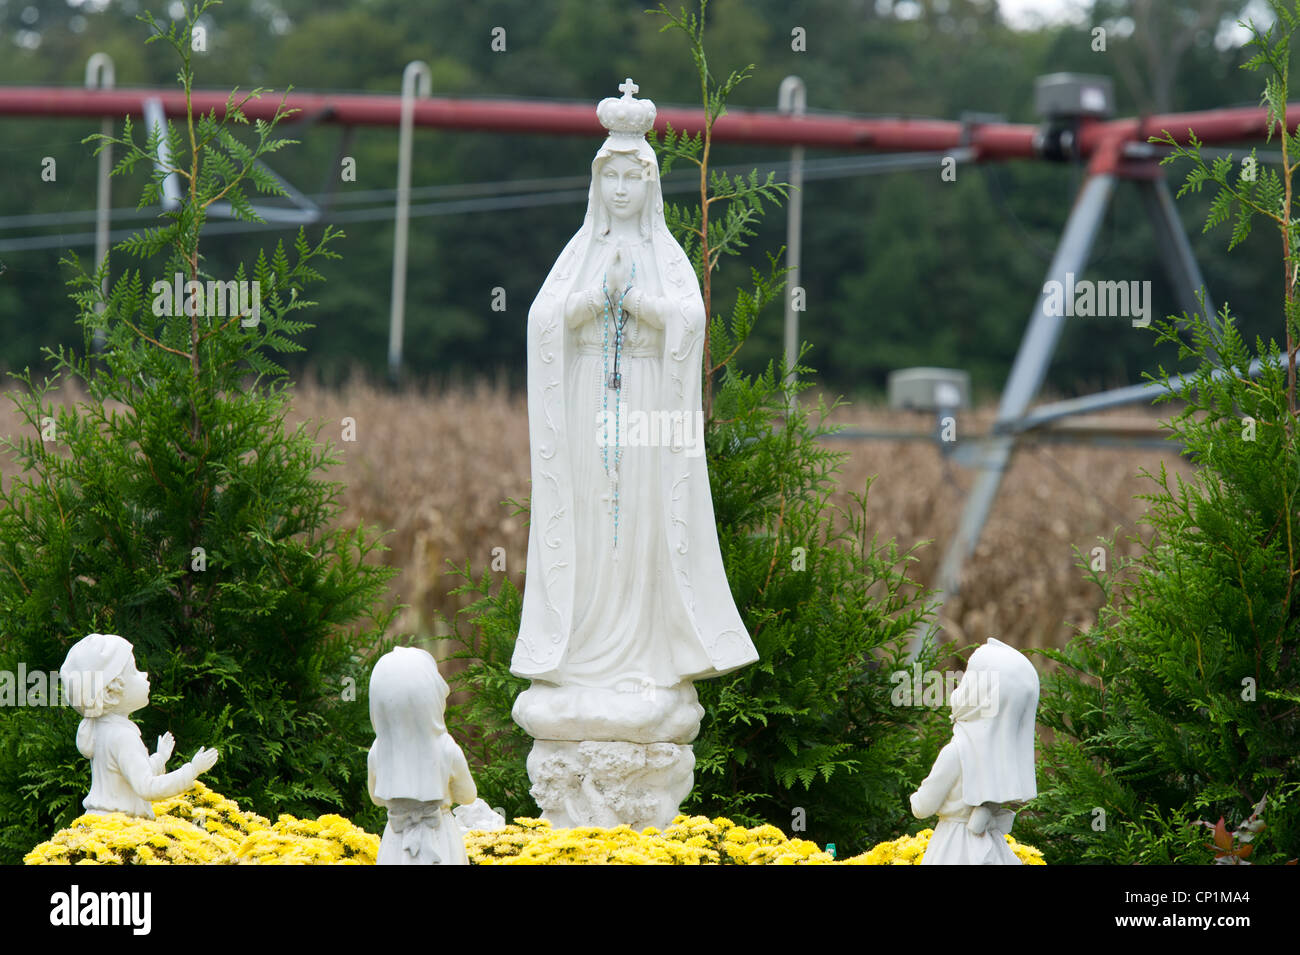 Irrigation system over corn crop behind Christian lawn ornaments on farm Stock Photo